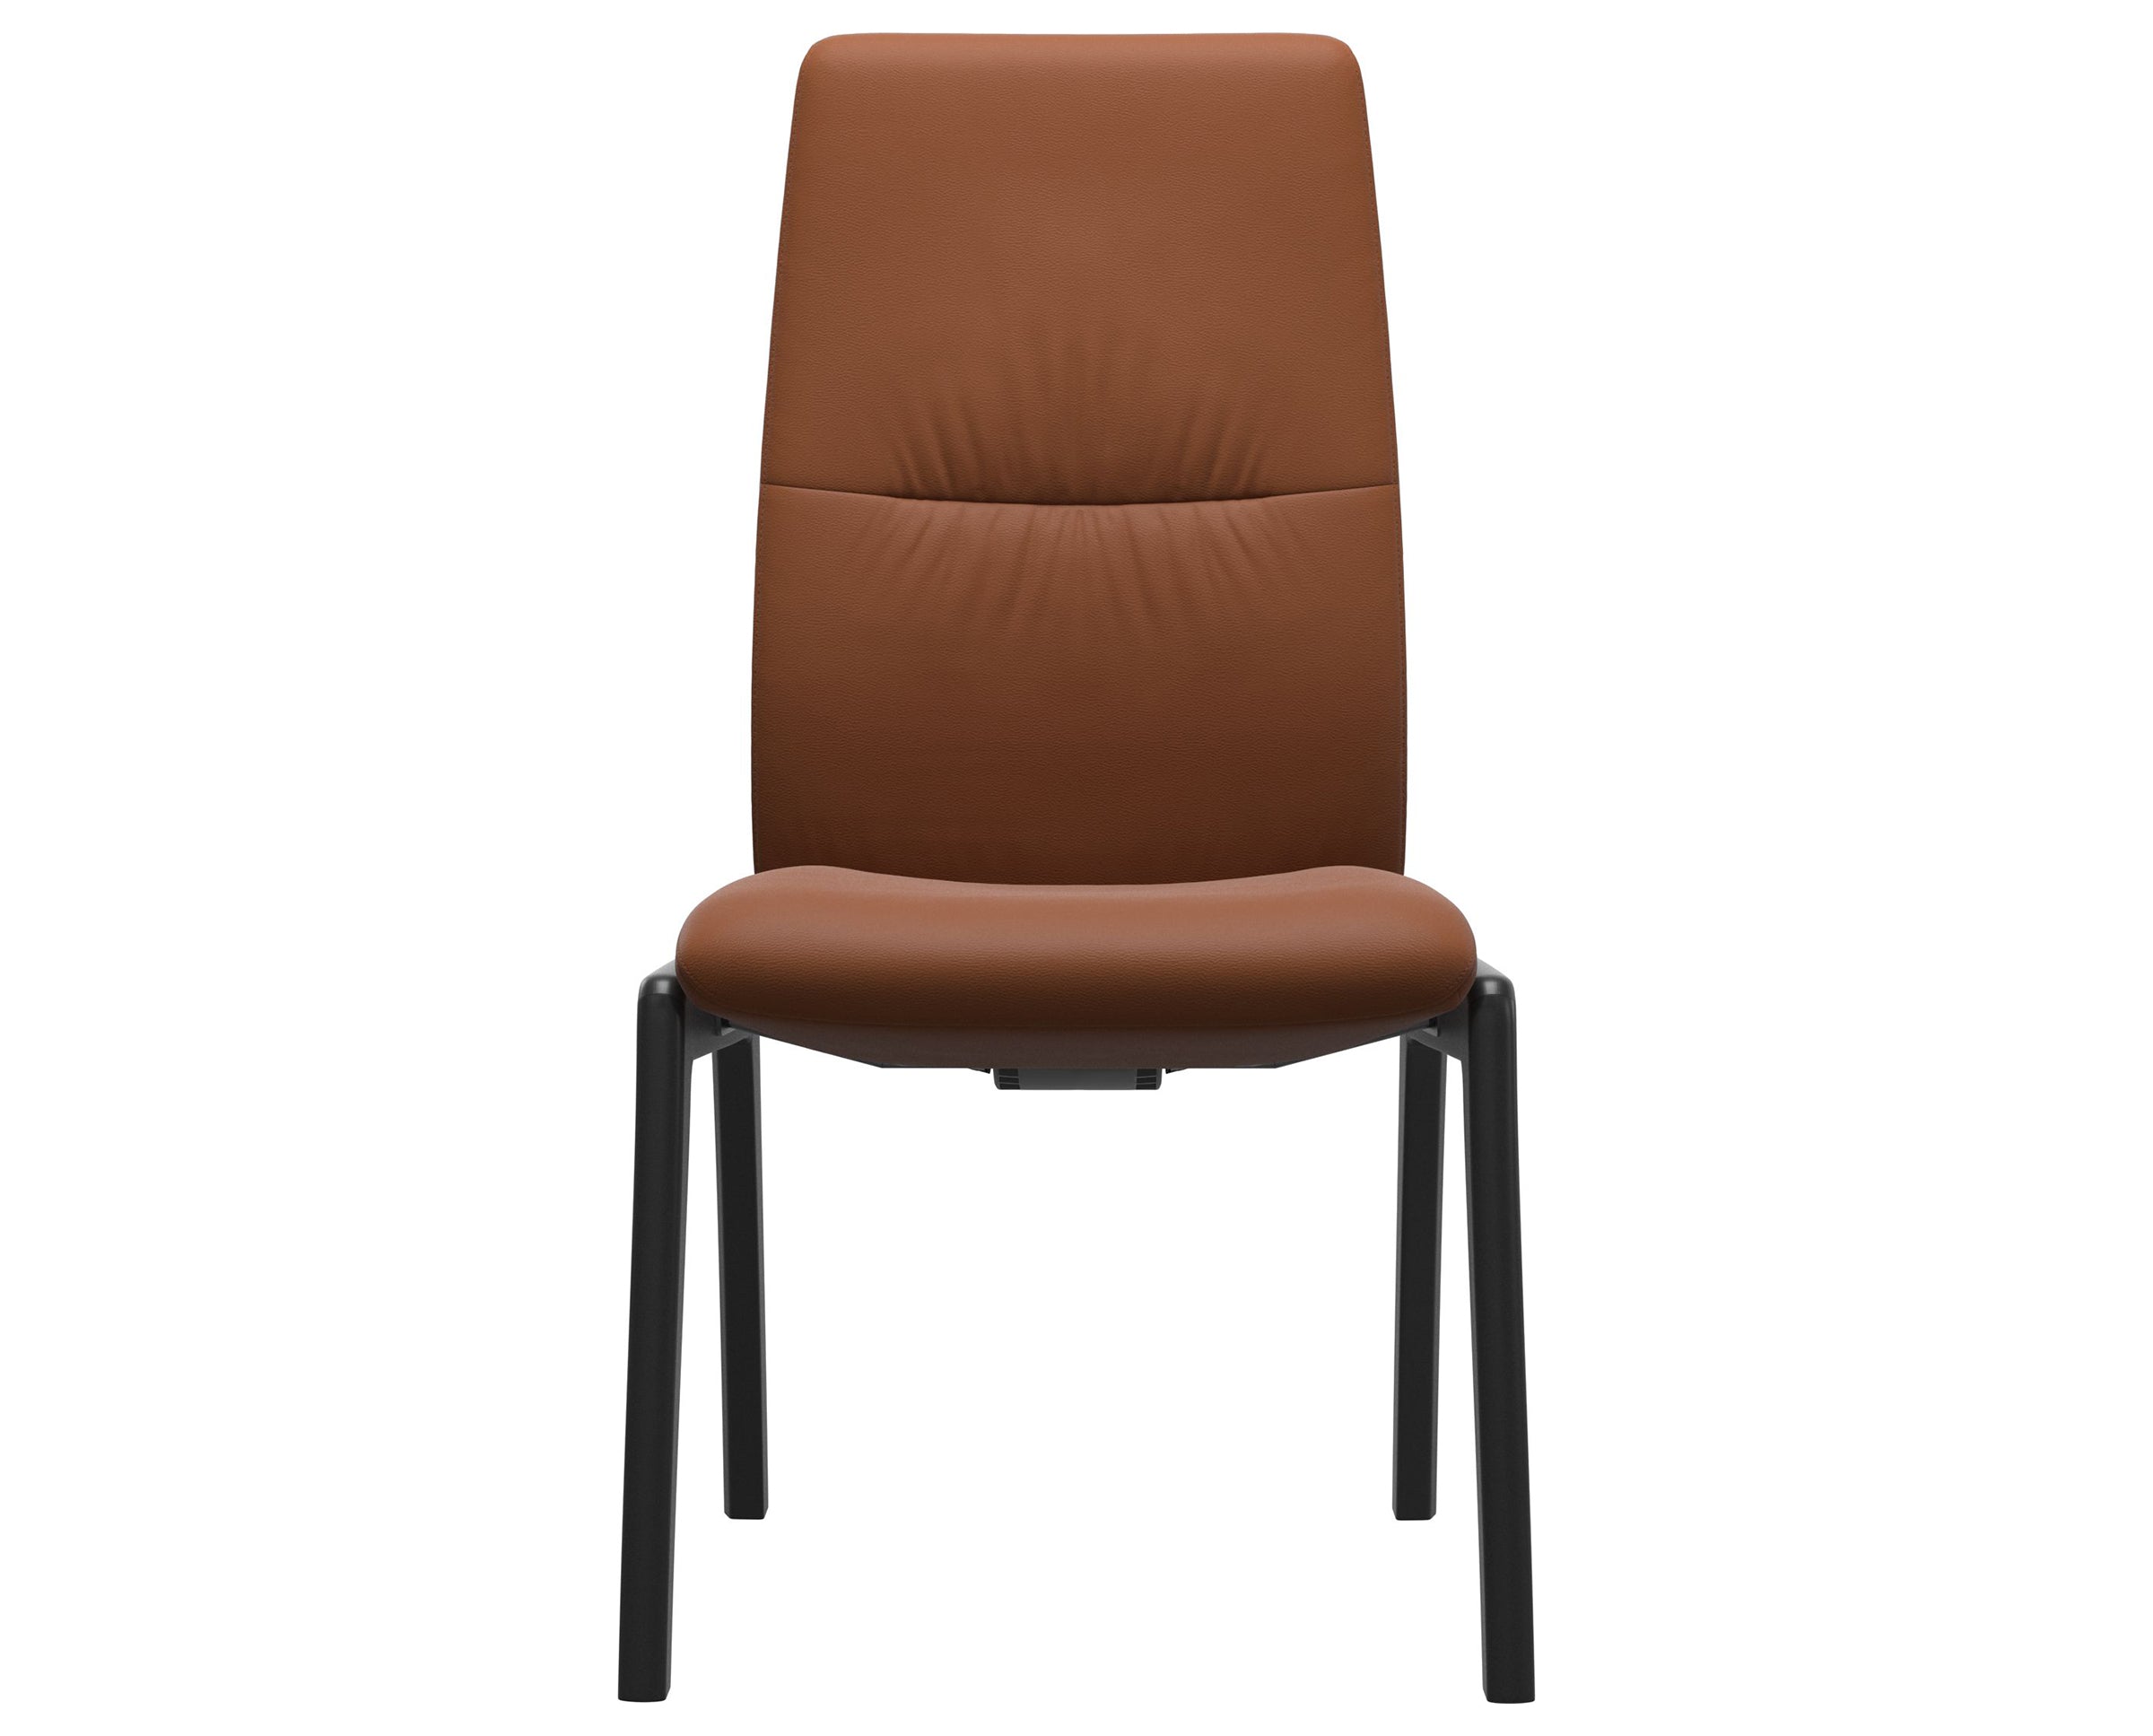 Paloma Leather New Cognac and Black Base | Stressless Mint High Back D100 Dining Chair | Valley Ridge Furniture